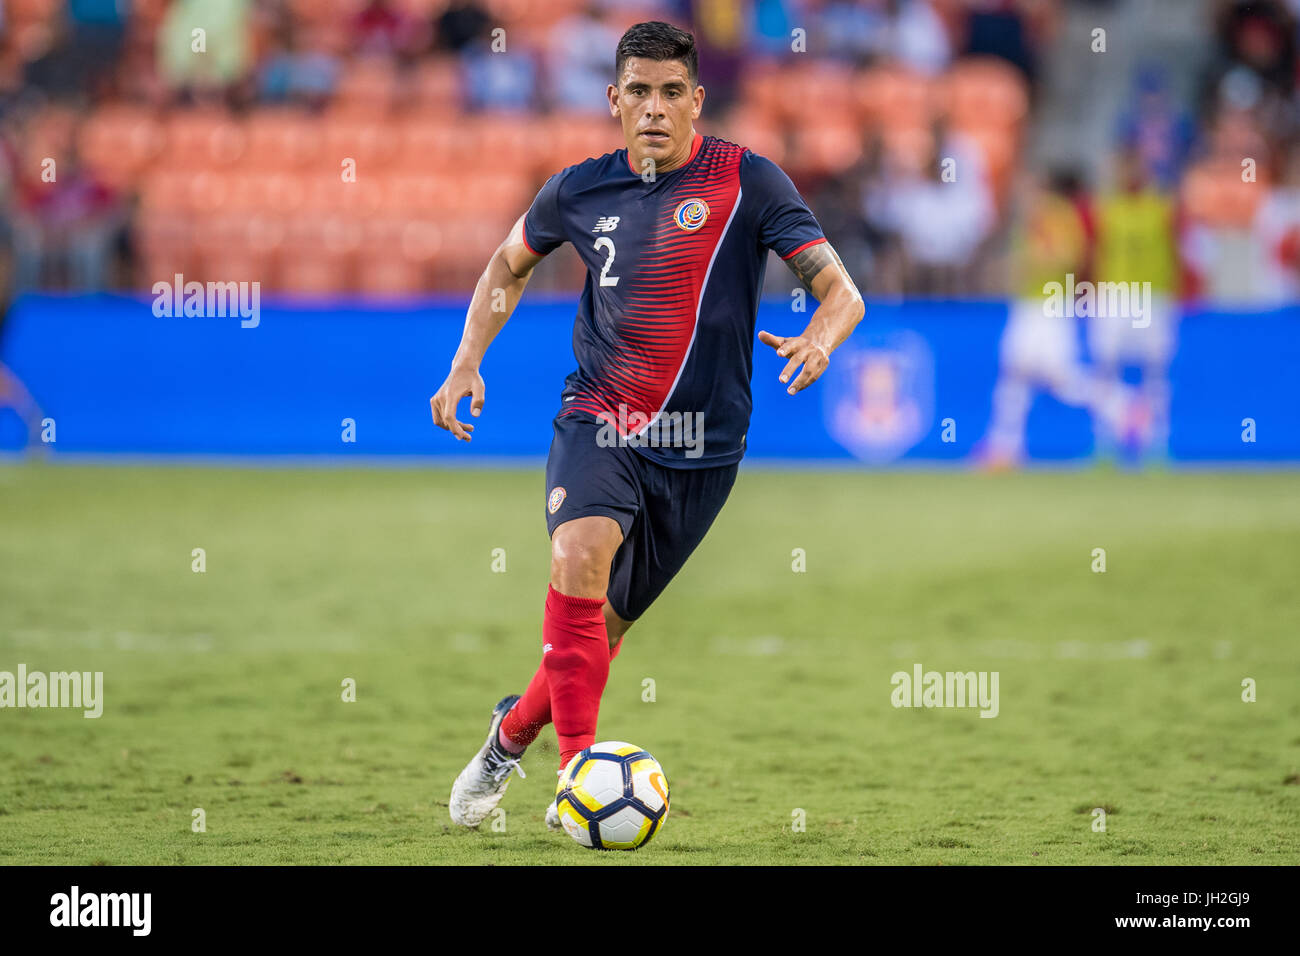 Houston, Texas, USA. 11th July, 2017. Costa Rica defender Johnny Acosta (2) controls the ball during the 2nd half of an international CONCACAF Gold Cup soccer match between Canada and Costa Rica at BBVA Compass Stadium in Houston, TX on July 11th, 2017. The game ended in a 1-1 draw. Credit: Trask Smith/ZUMA Wire/Alamy Live News Stock Photo